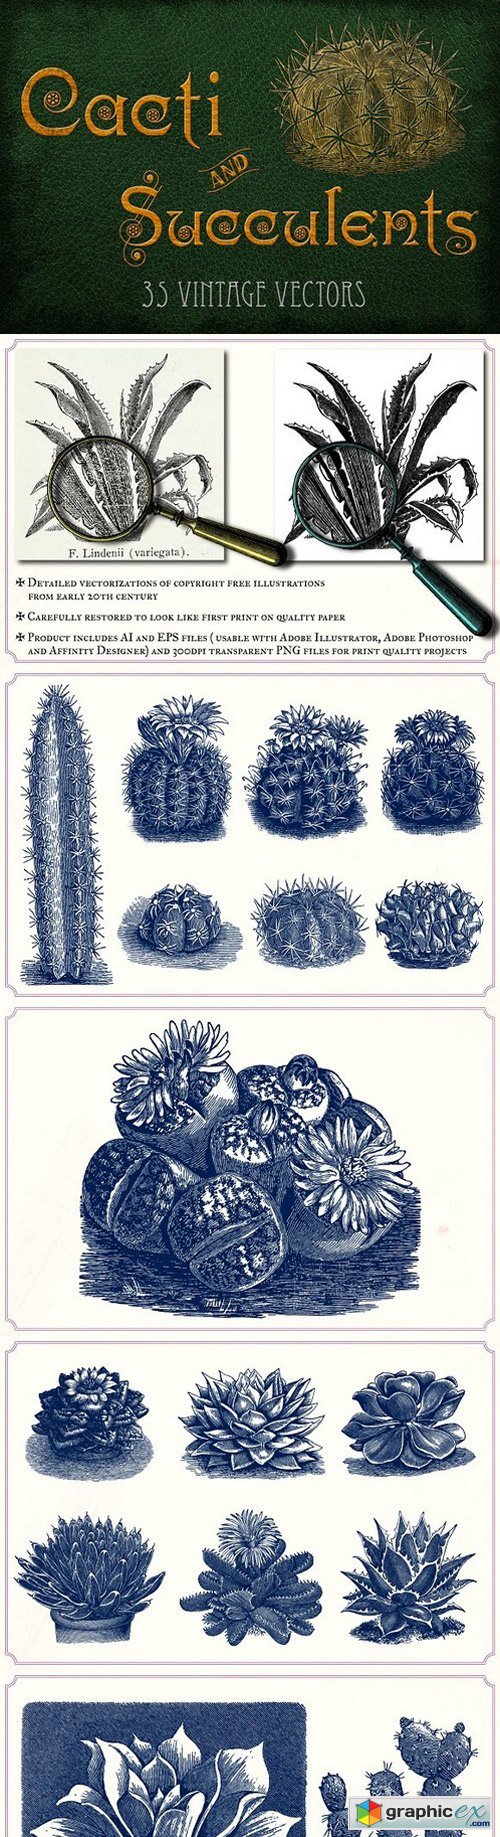 Vintage Cacti and Succulents